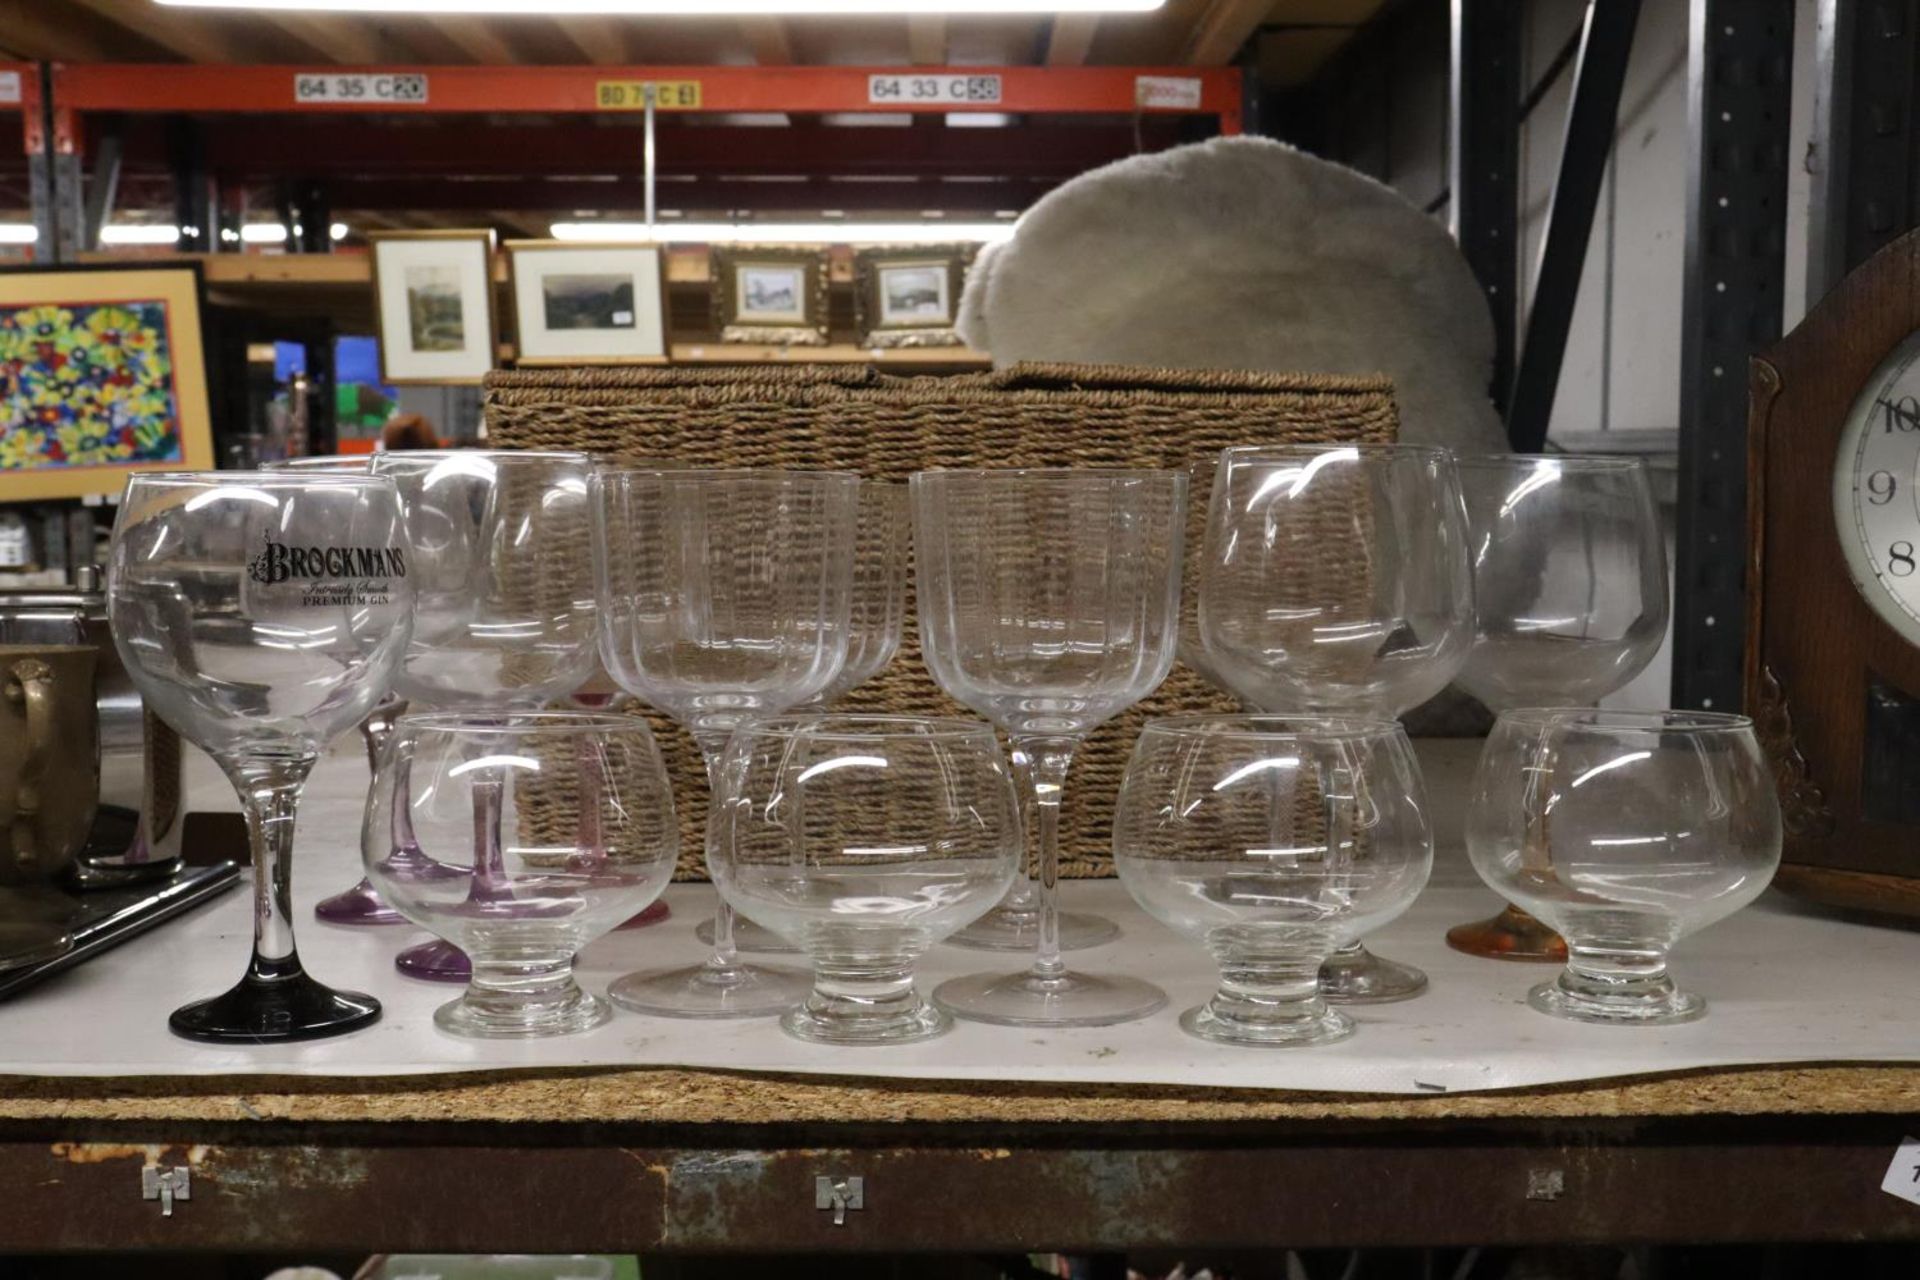 A QUANTITY OF GIN GLASSES AND BOWLS IN A BASKET